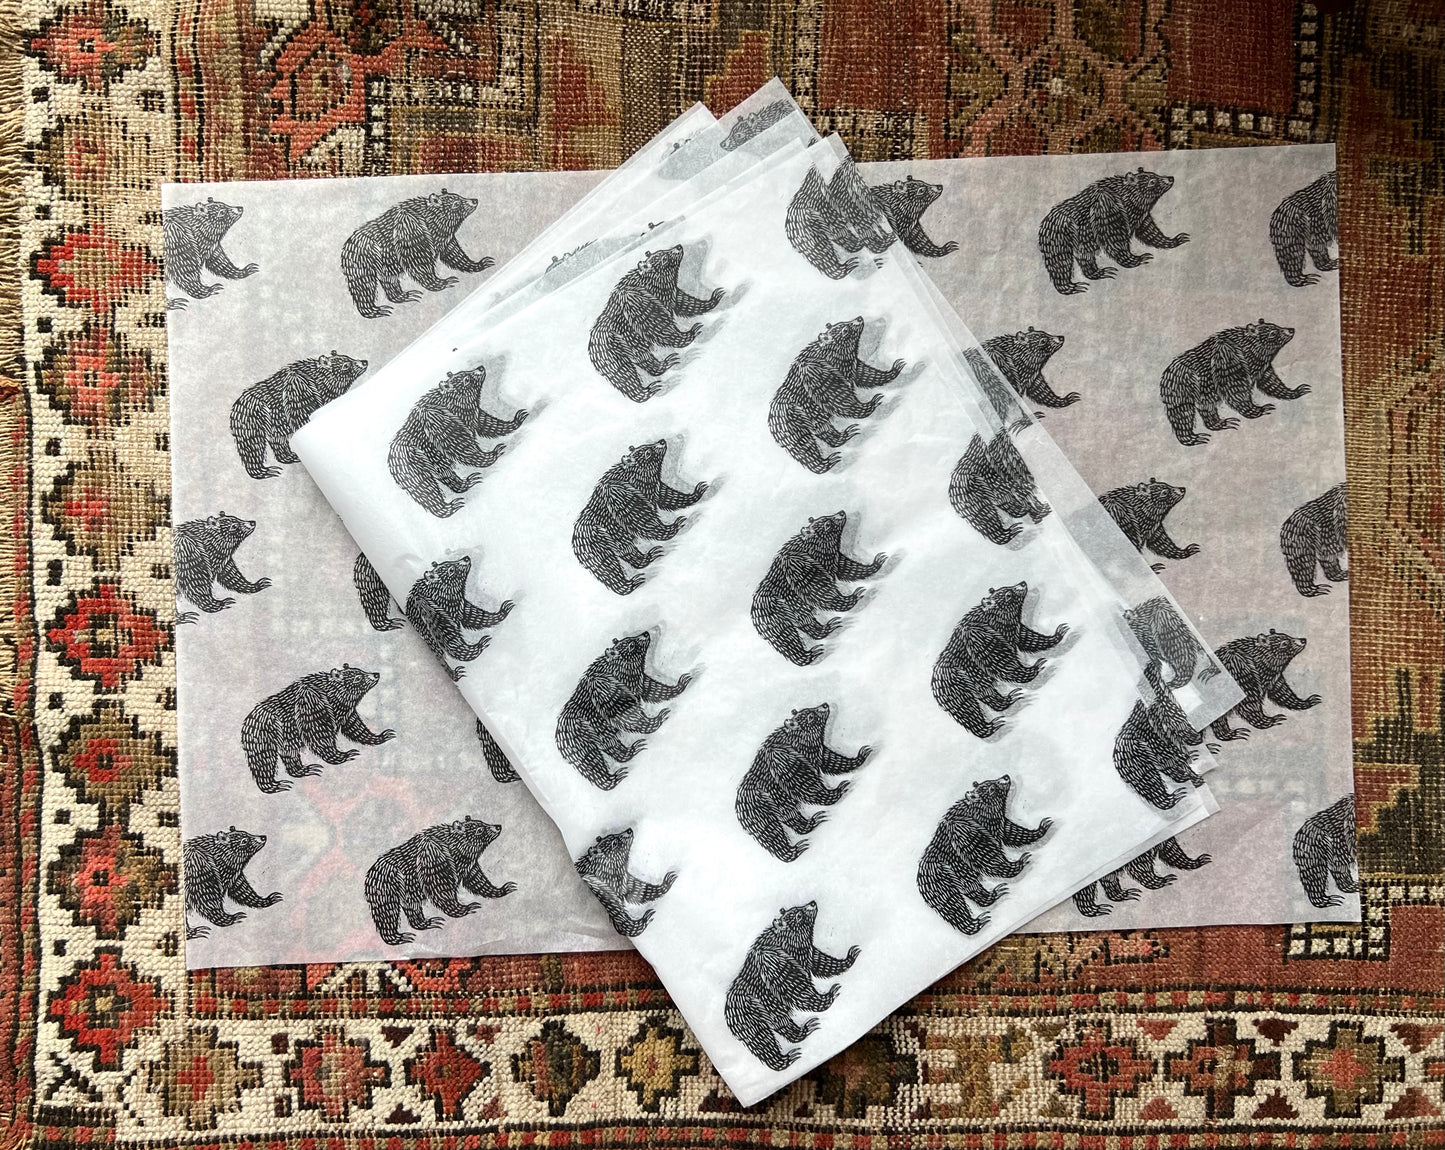 5 sheets of Bear tissue wrapping paper